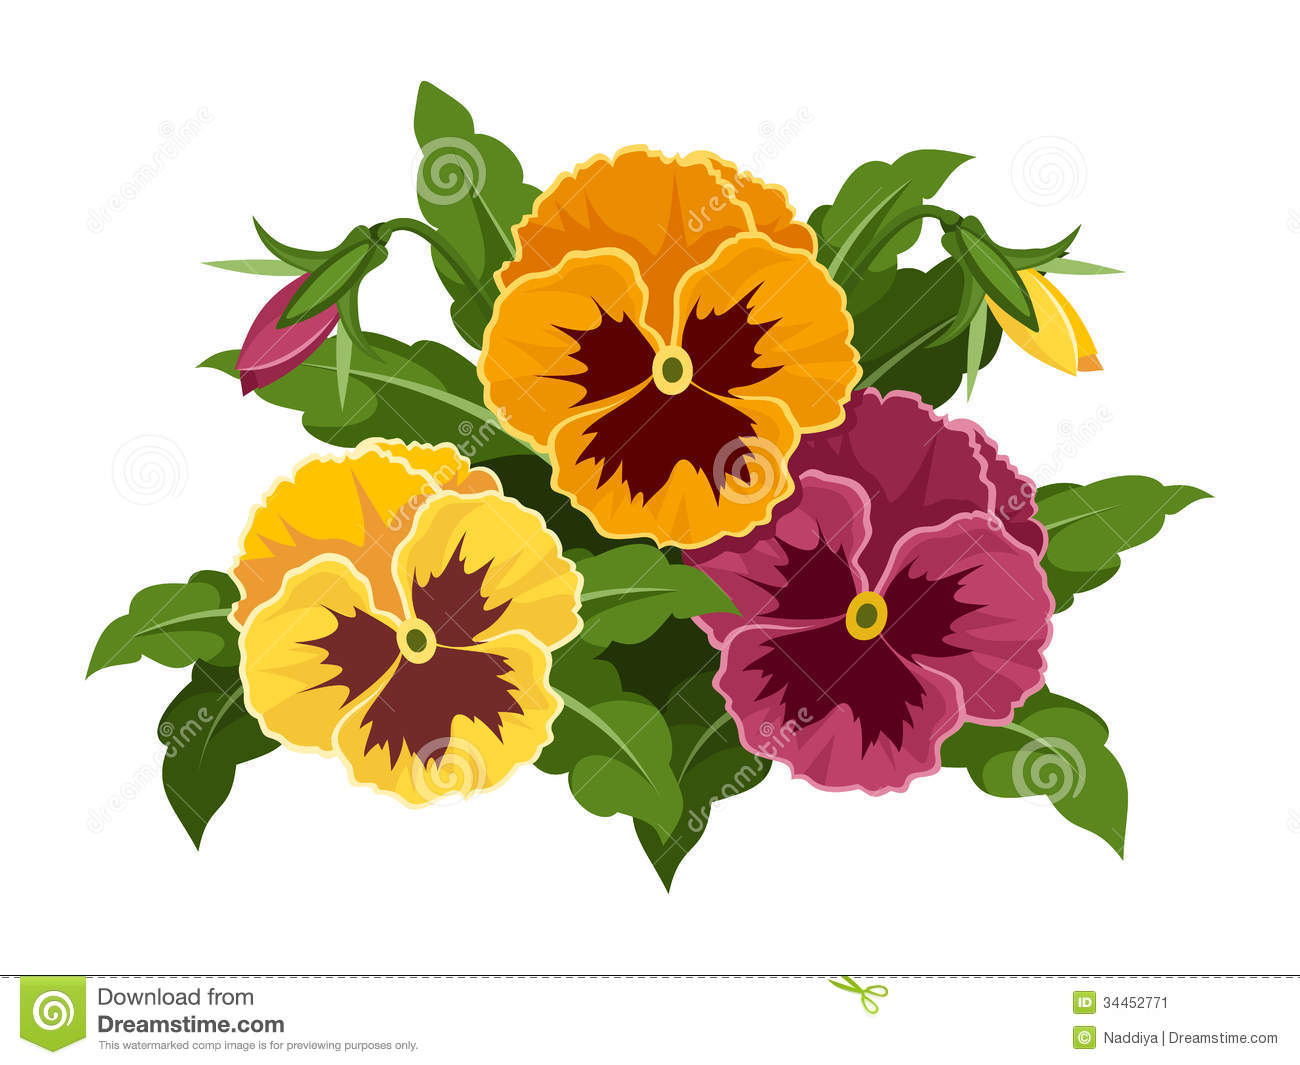 Displaying 18  Images For   Pansy Flower Clip Art   